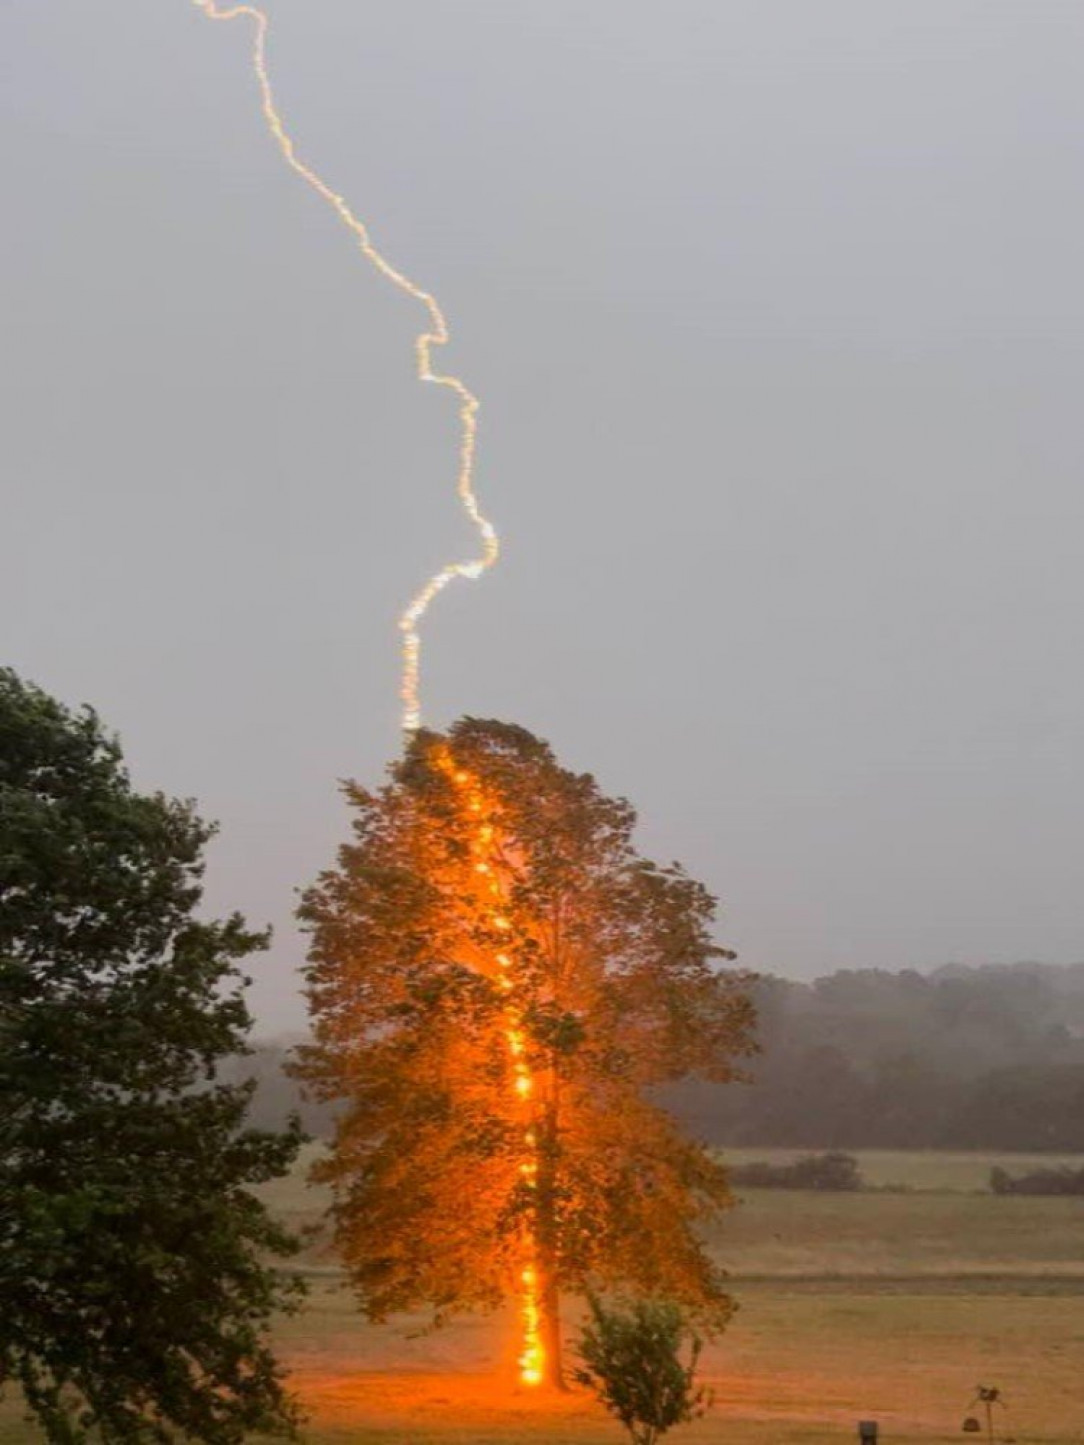 An incredible shot showing the raw power of lightning striking a tree at the exact moment the picture is taken